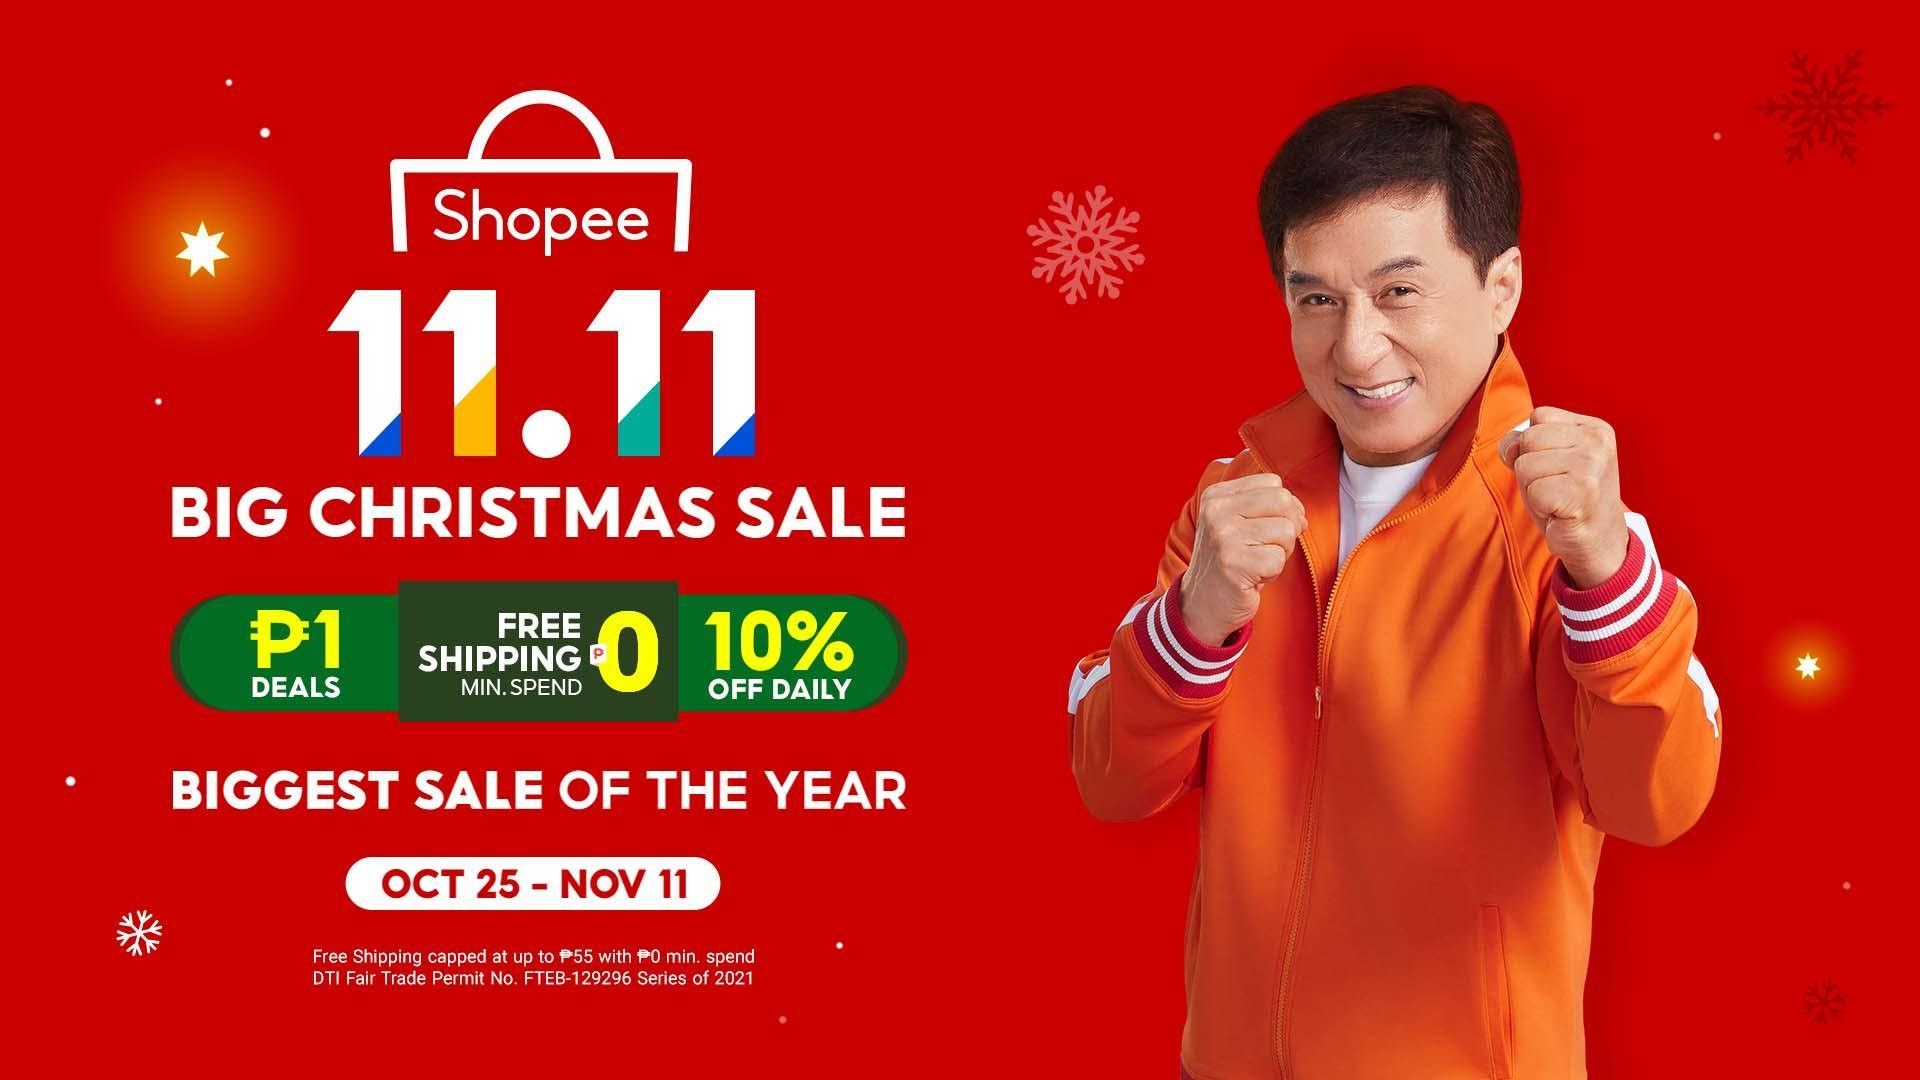 Shopee Launches 11.11 Big Christmas Sale, its Biggest Sale of the Year, with Unbeatable deals and Nonstop Fun